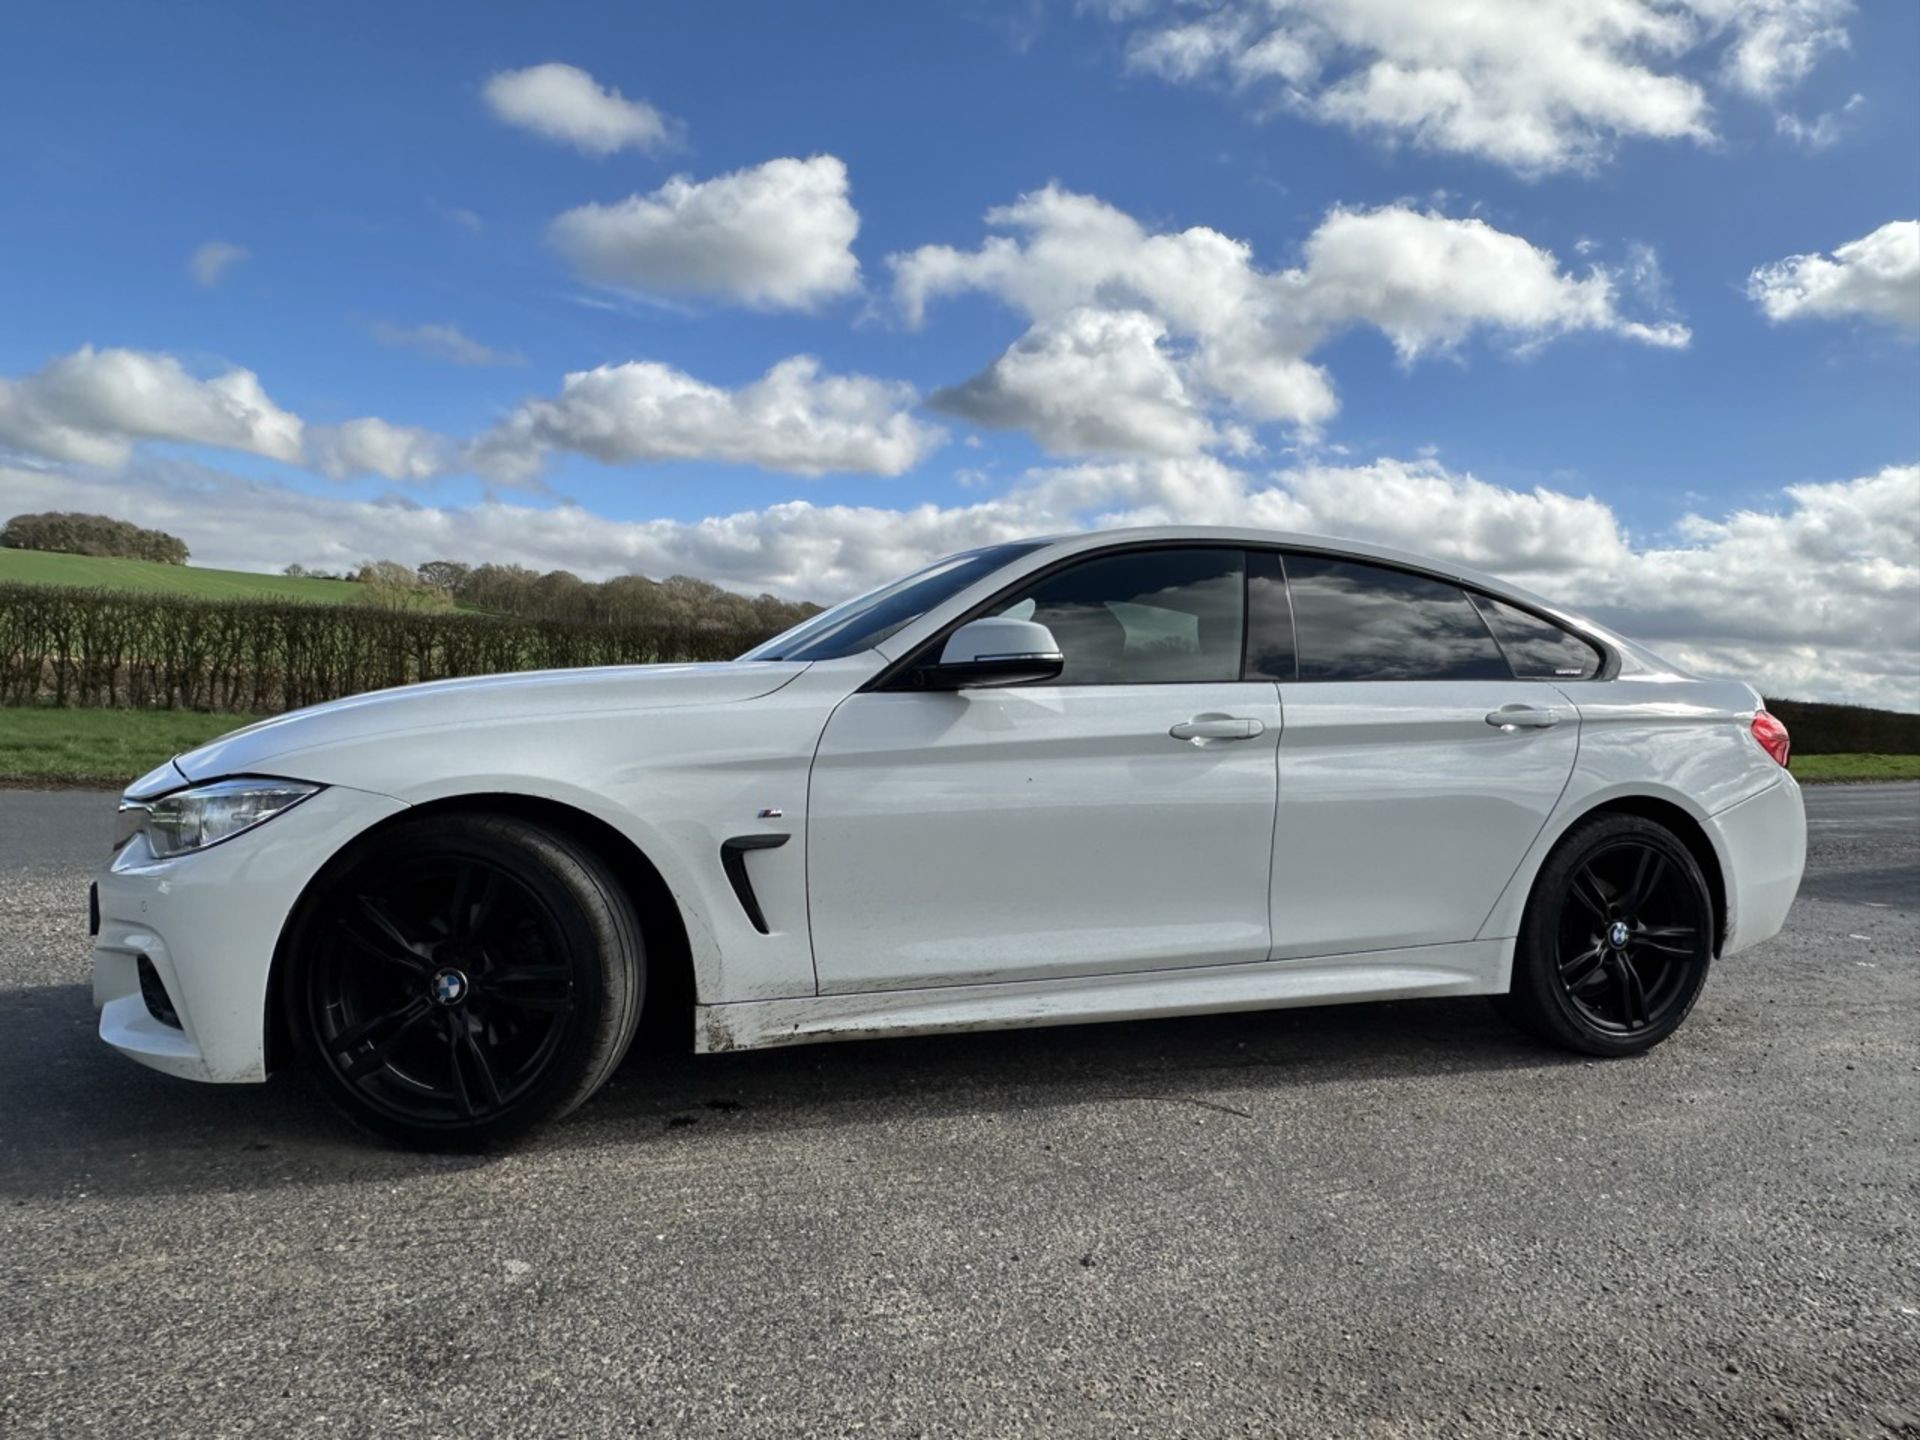 BMW 4 SERIES 420i M Sport 5dr [Professional Media] Manual - Petrol - 2.0 - Coupe- 54k miles - 2016 - Image 4 of 22